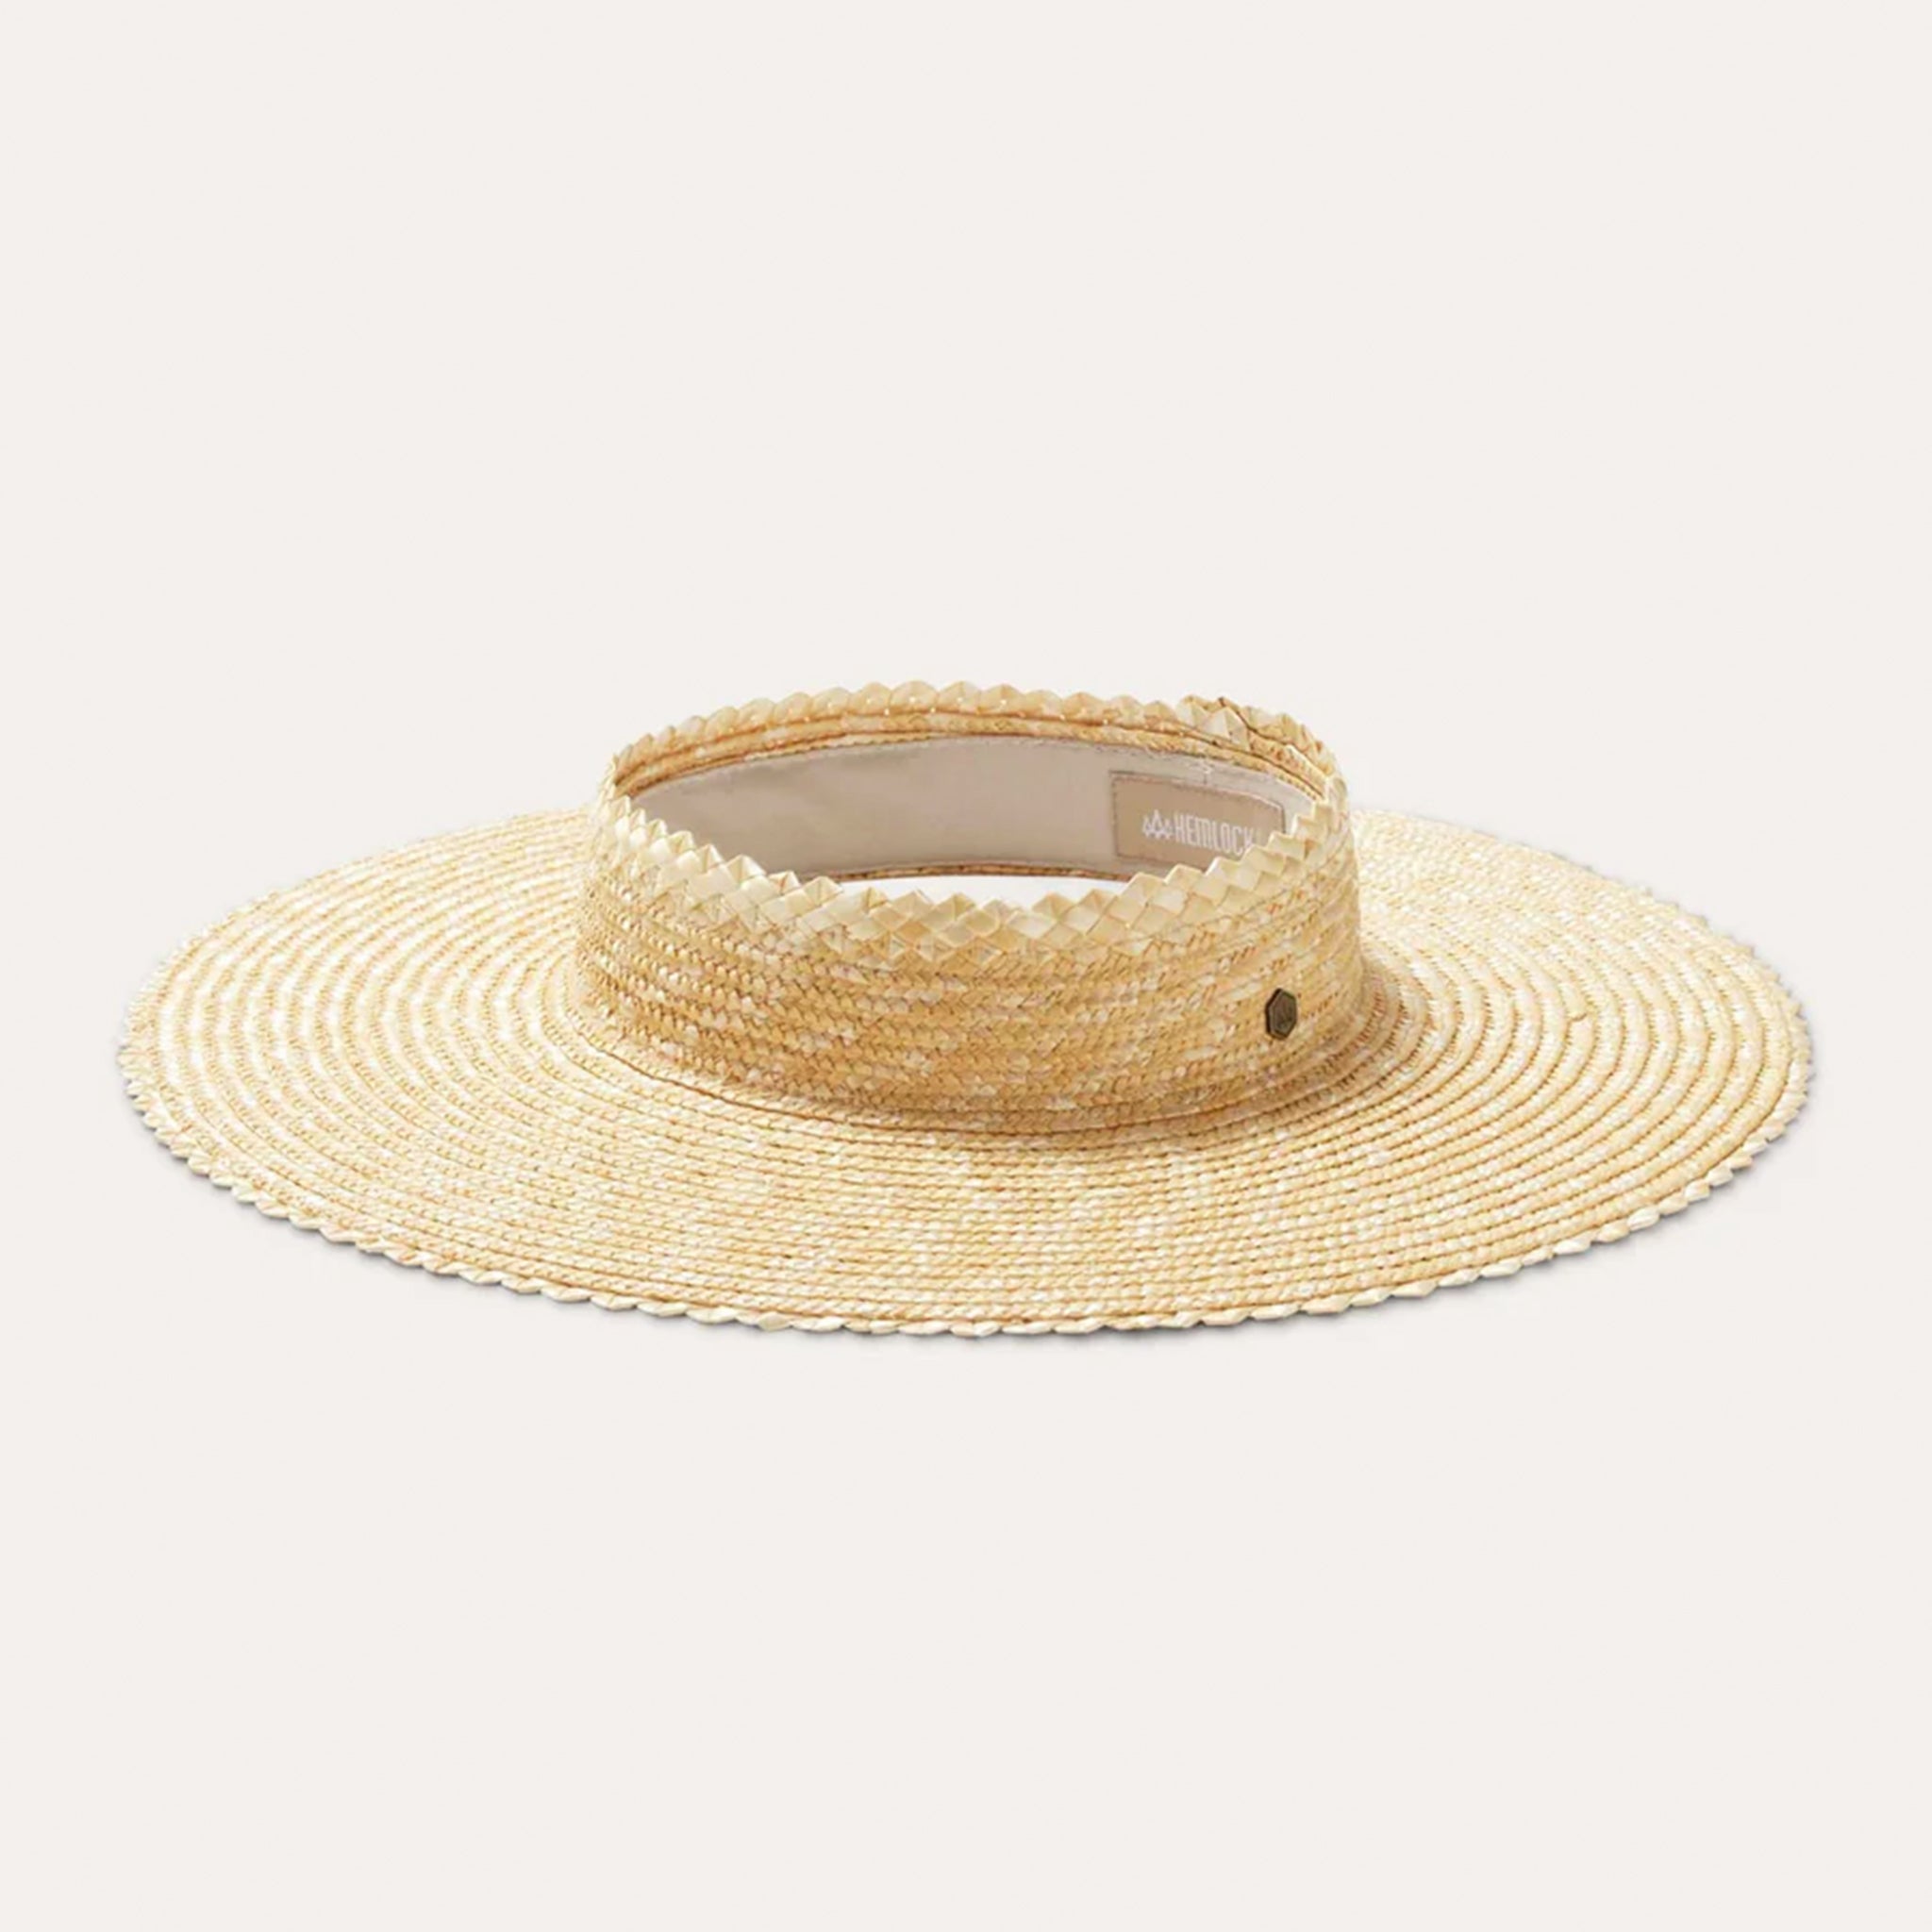 On a white background is a crown less straw sun hat/visor in a natural straw material.